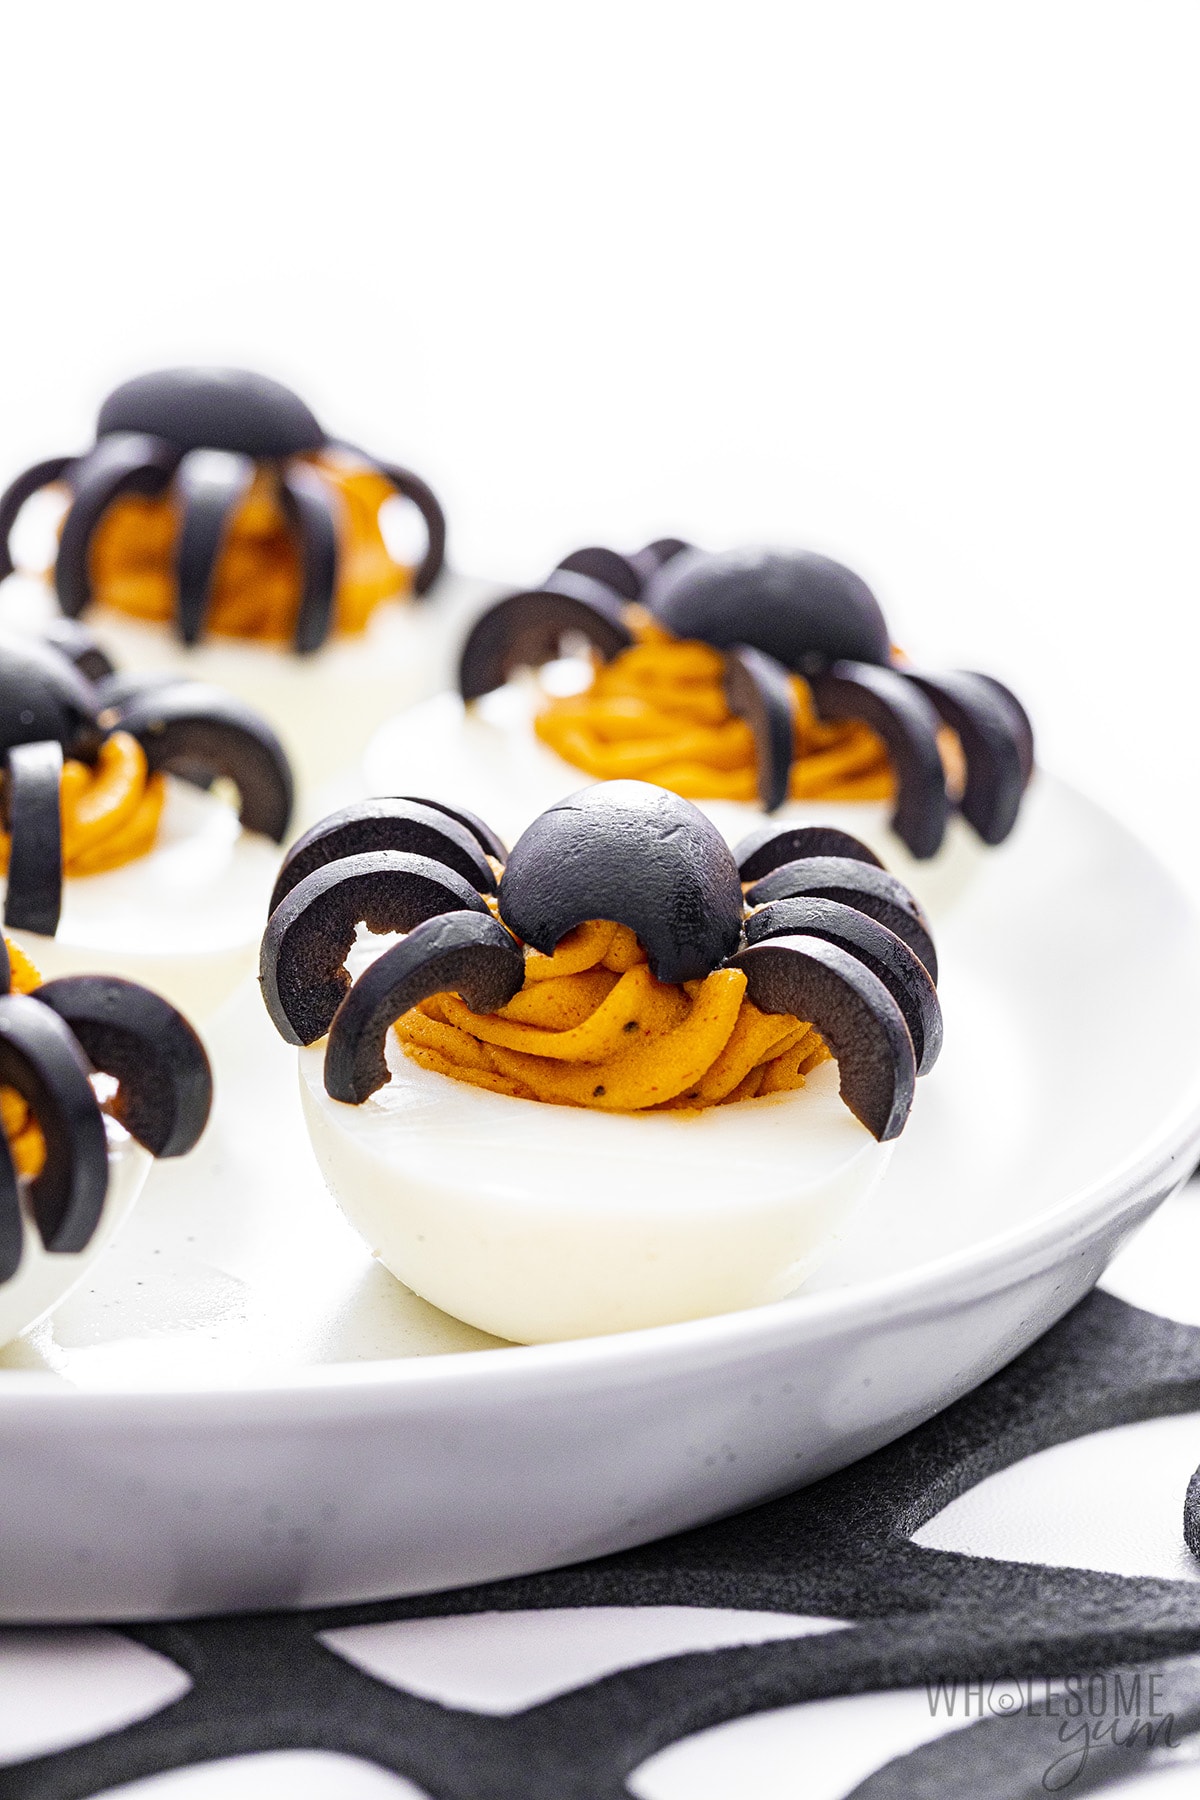 Halloween deviled eggs on plate, side view.